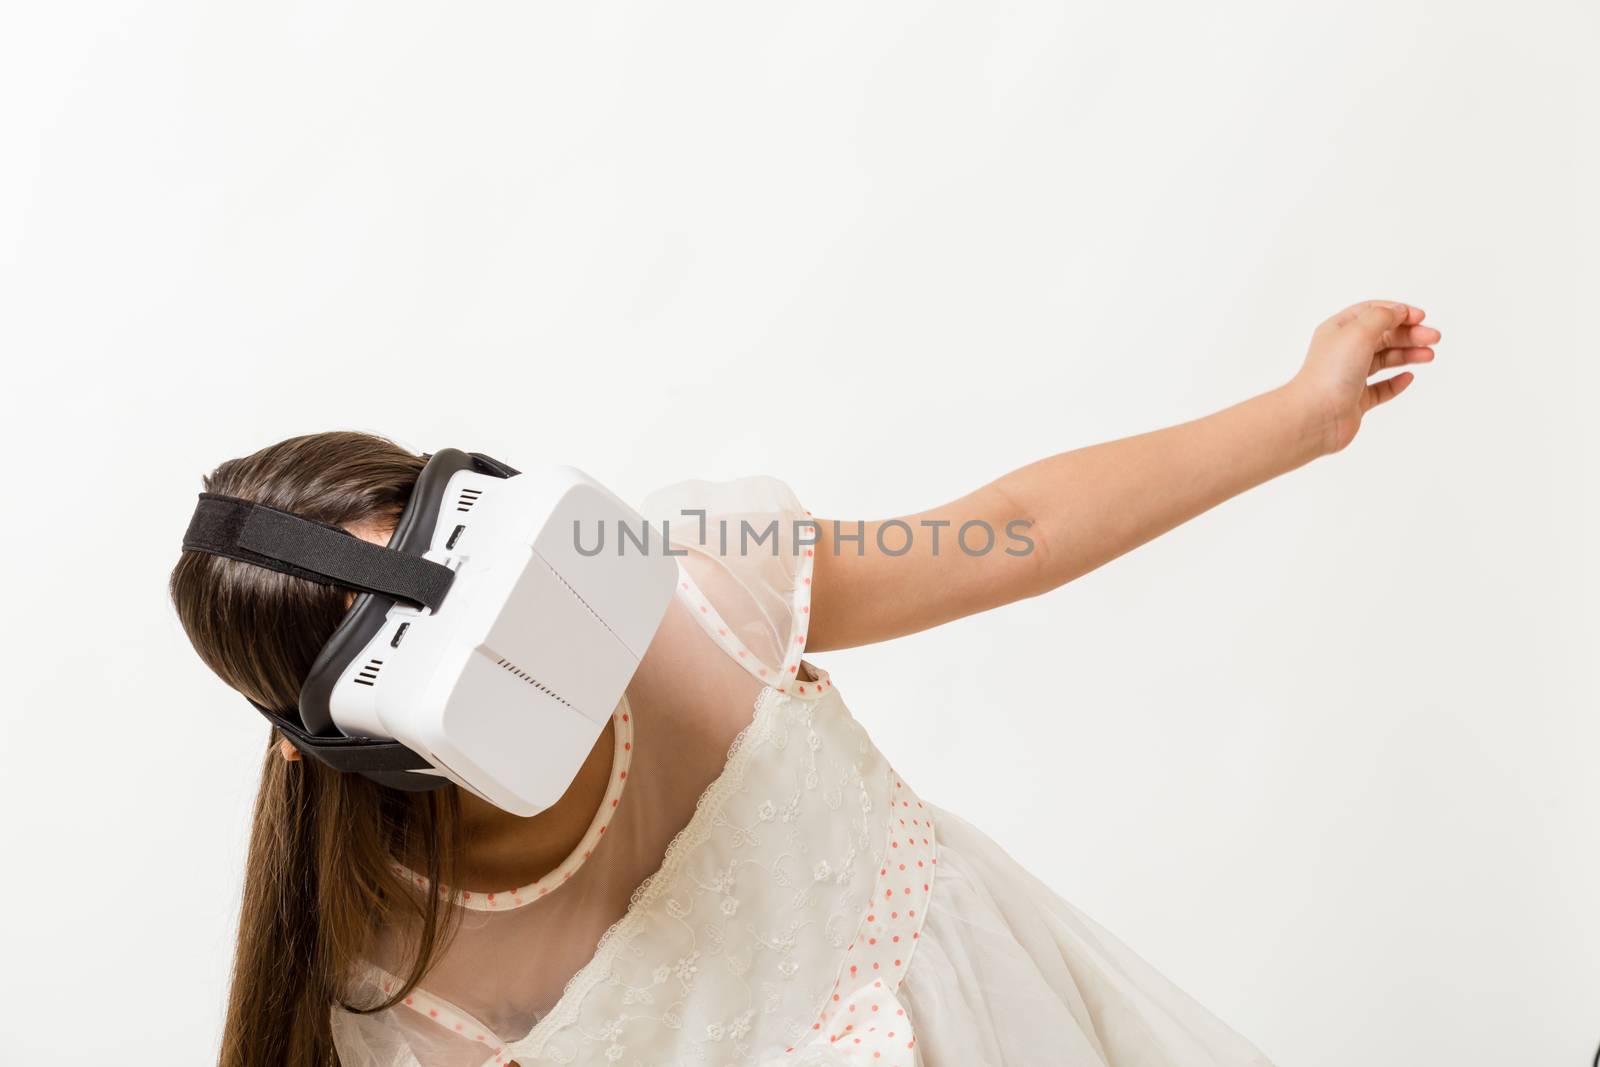 Young girl in VR goggles by imagesbykenny